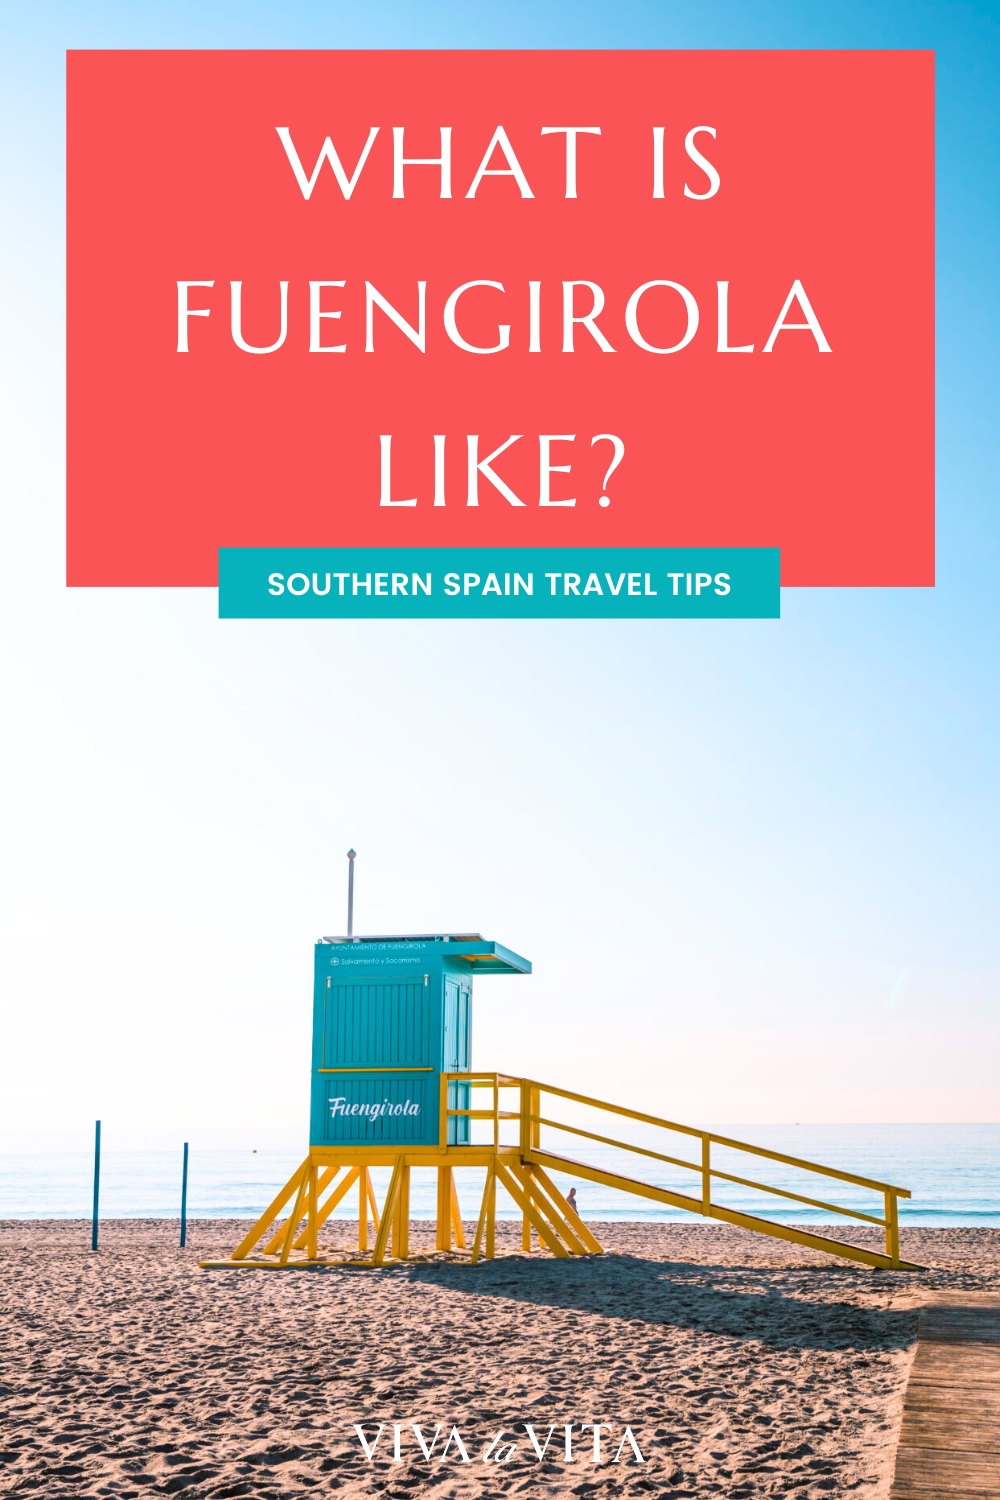 pinterest image showing a beach with lifeguard station in Fuengirola, with a headline: what is Fuengirola like? Southern spain travel tips.